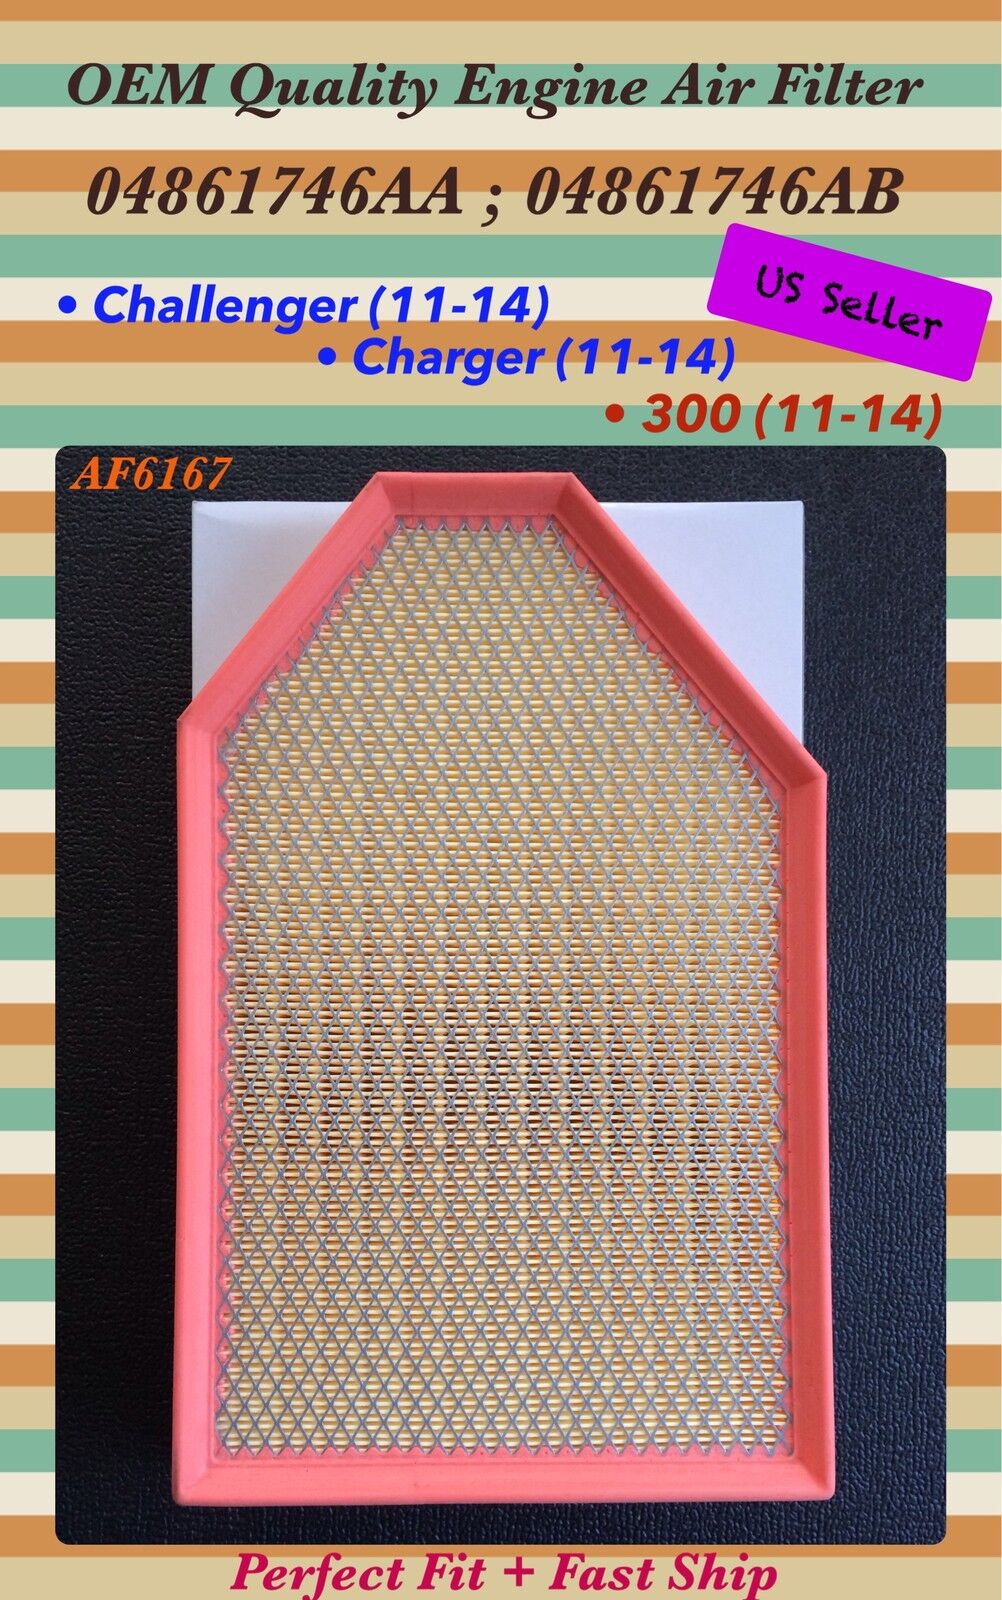 Engine Air Filter Fits Charger Challenger 300 Quality PerfectFit  A++ AF6167  